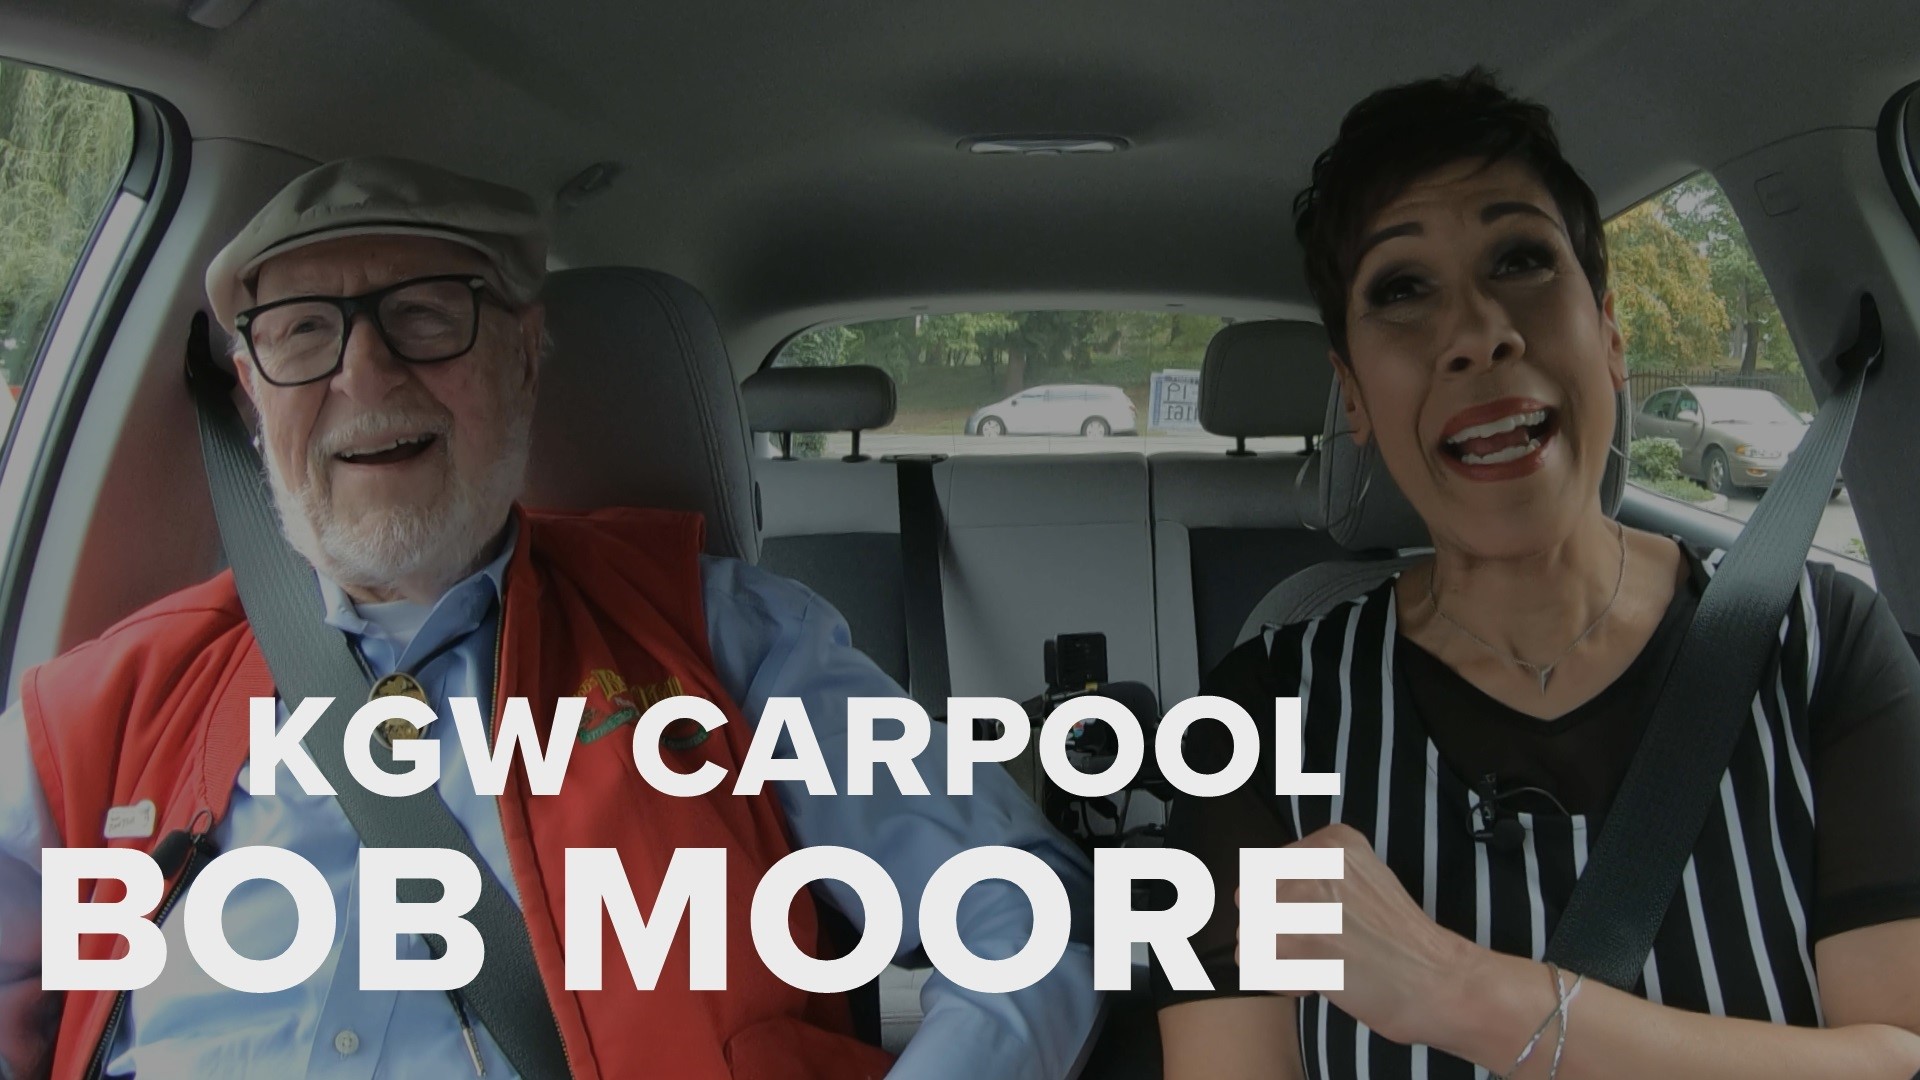 Bob Moore is 90 and has no plans to retire. He opens up about work, love, and losing his wife Charlee after 66 years.